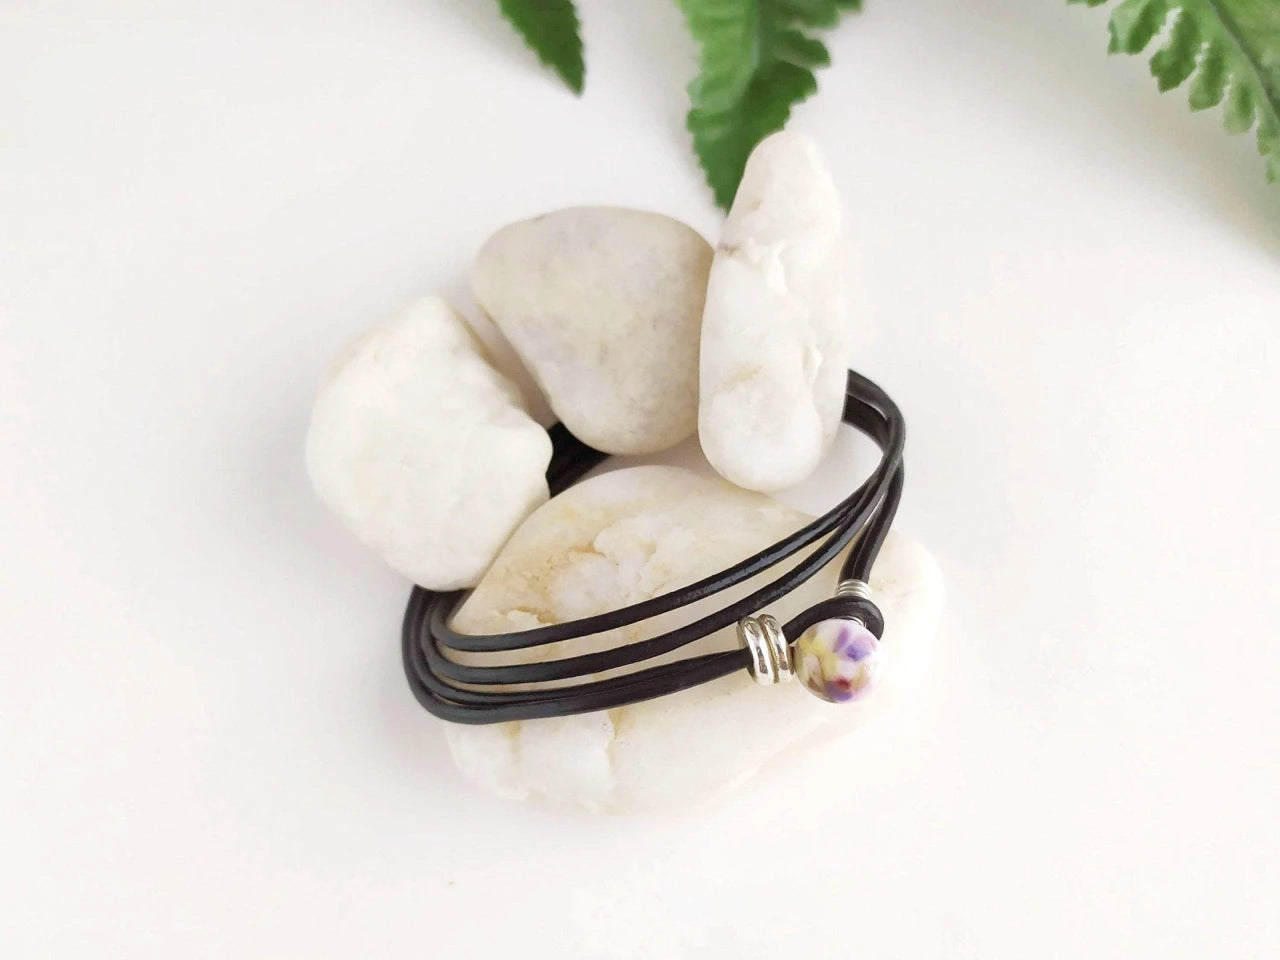 Double leather bracelet with decorated ceramic ball